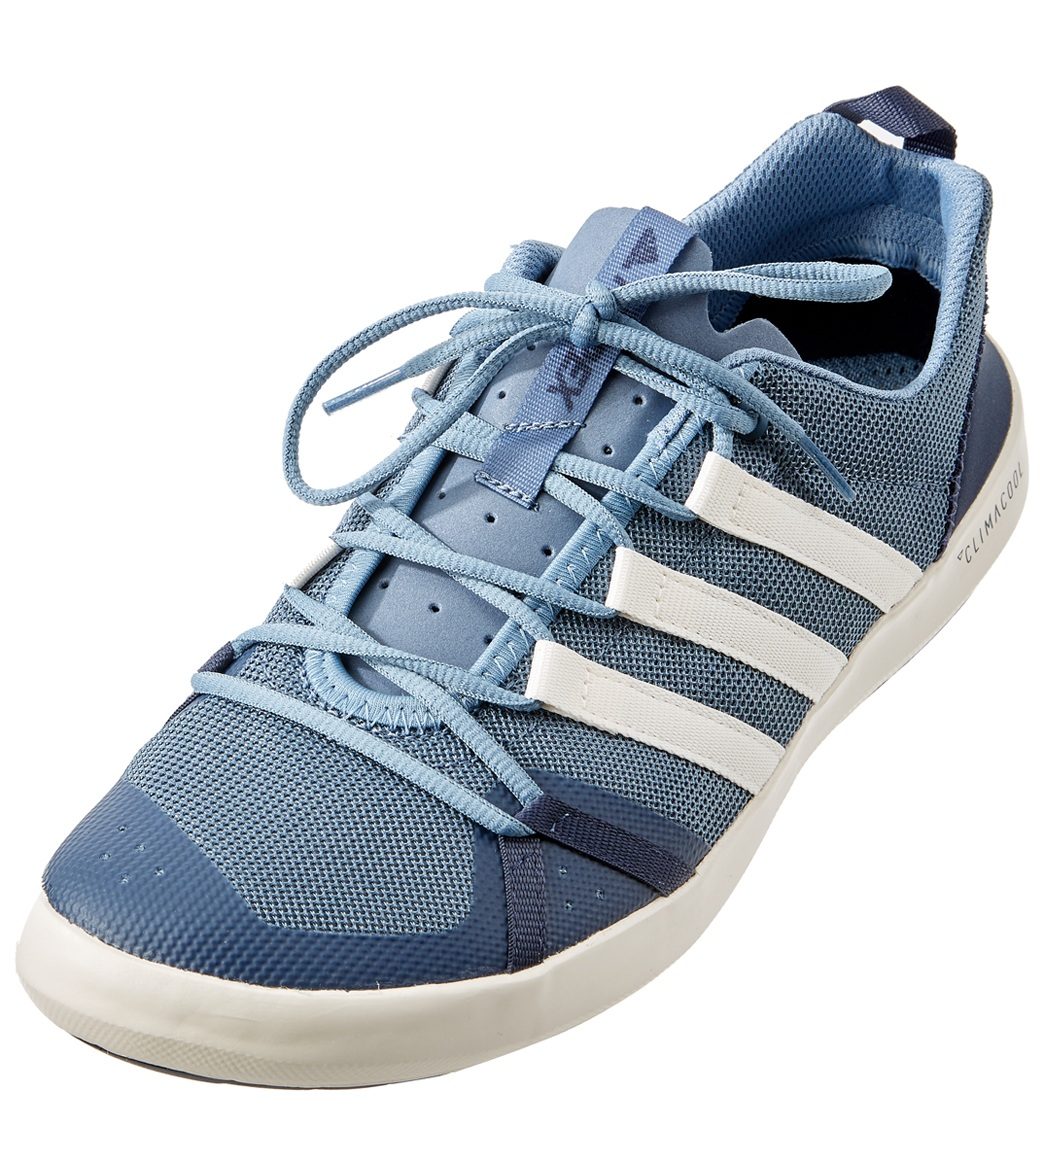 Adidas Climacool Boat Shoe at SwimOutlet.com